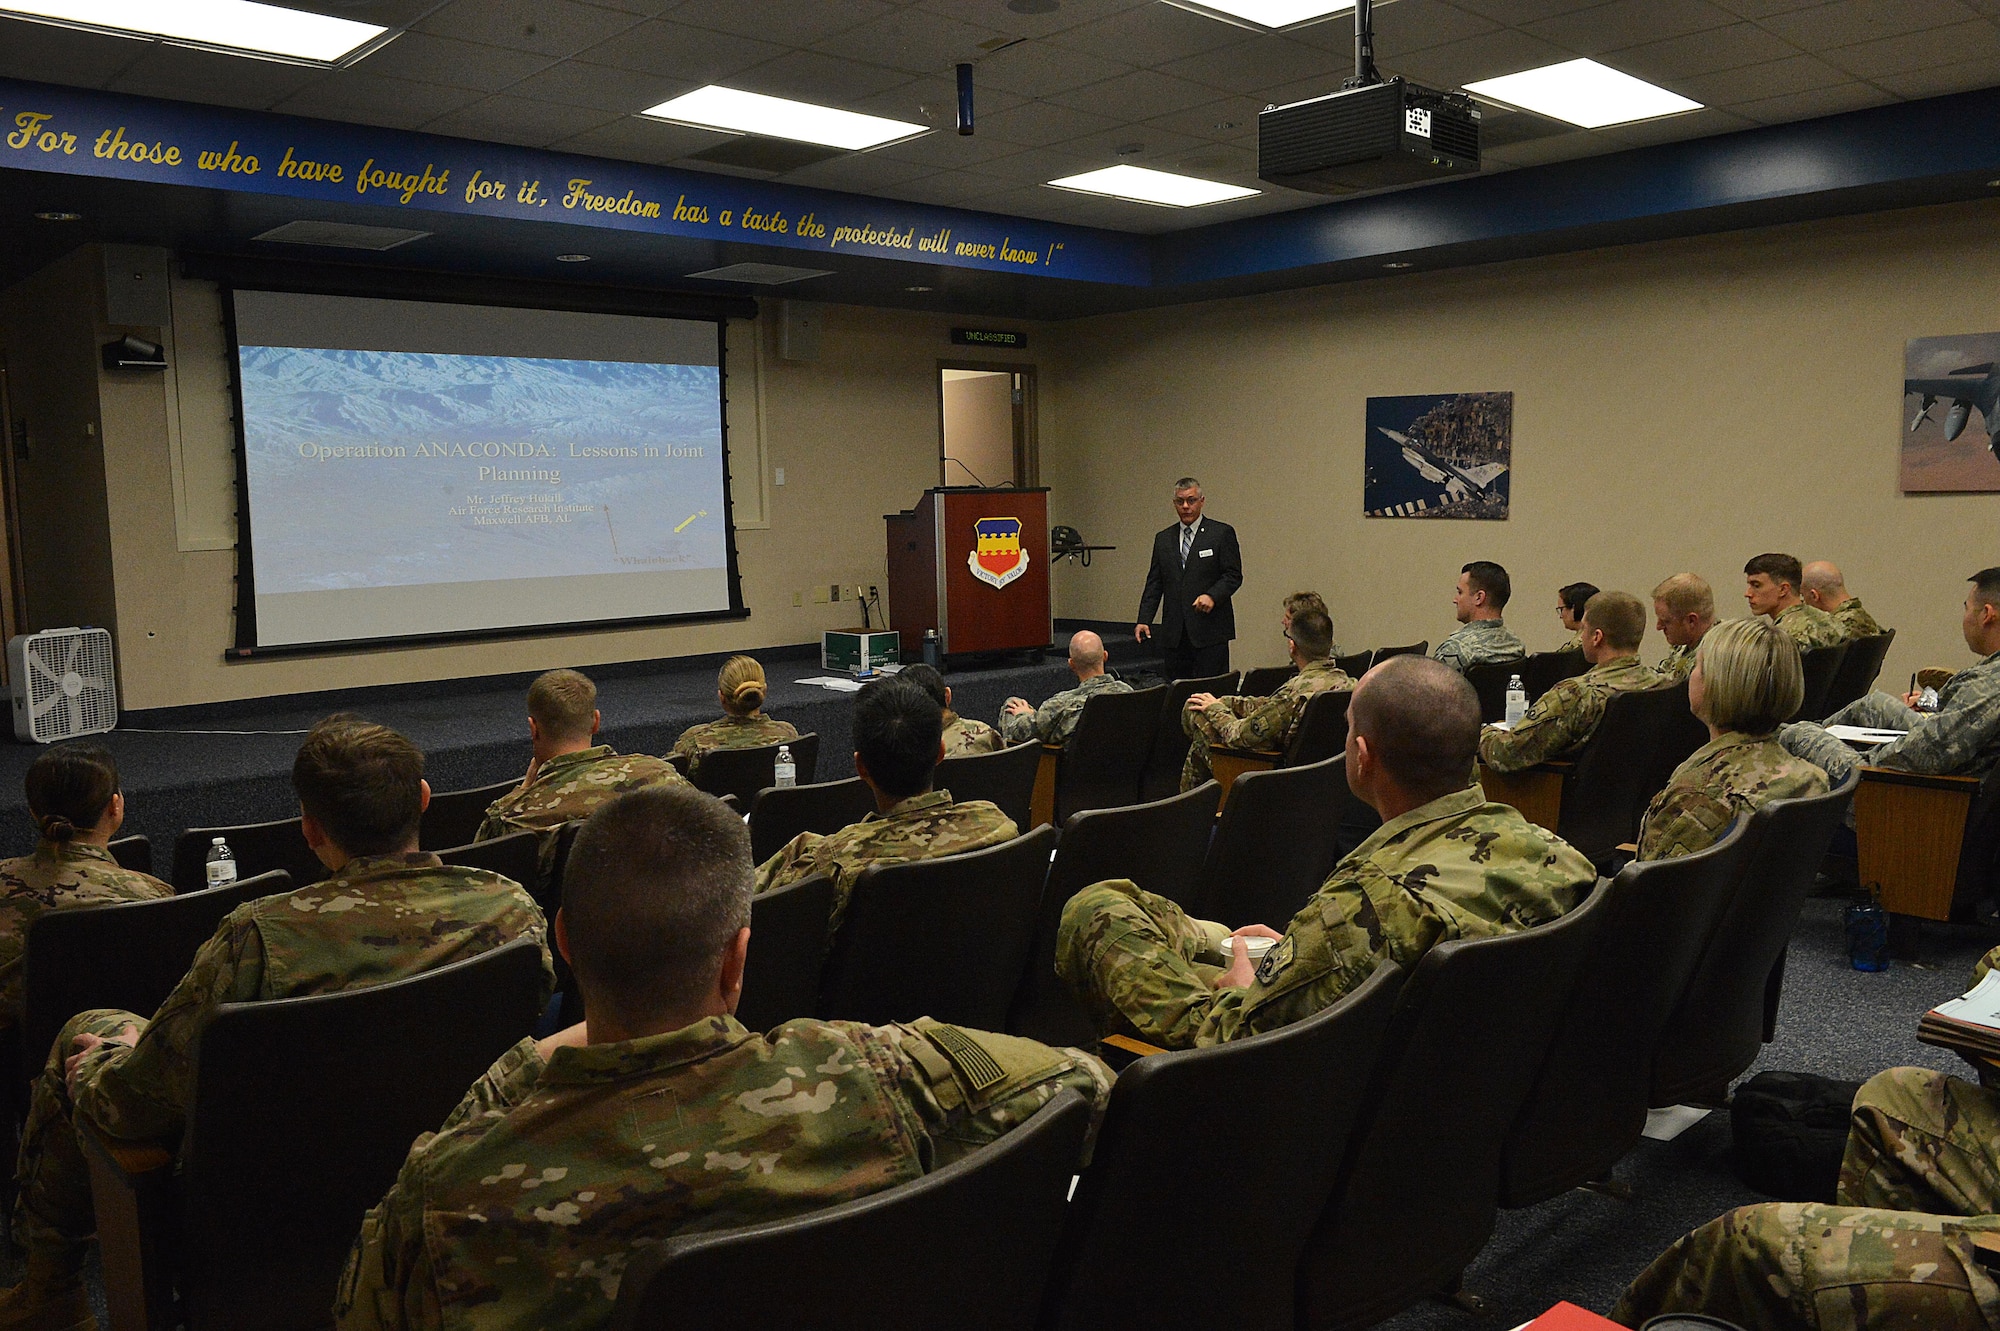 An instructor from Air University’s LeMay Center begins a lesson with Rear Mission Support Element course students at Shaw Air Force Base, S.C., Feb. 21, 2017. The four-week course provides two weeks of in-class instruction on military doctrine, joint operation planning, course of action development and OIR specific products. (U.S. Air Force photo by Senior Airman Diana M. Cossaboom)